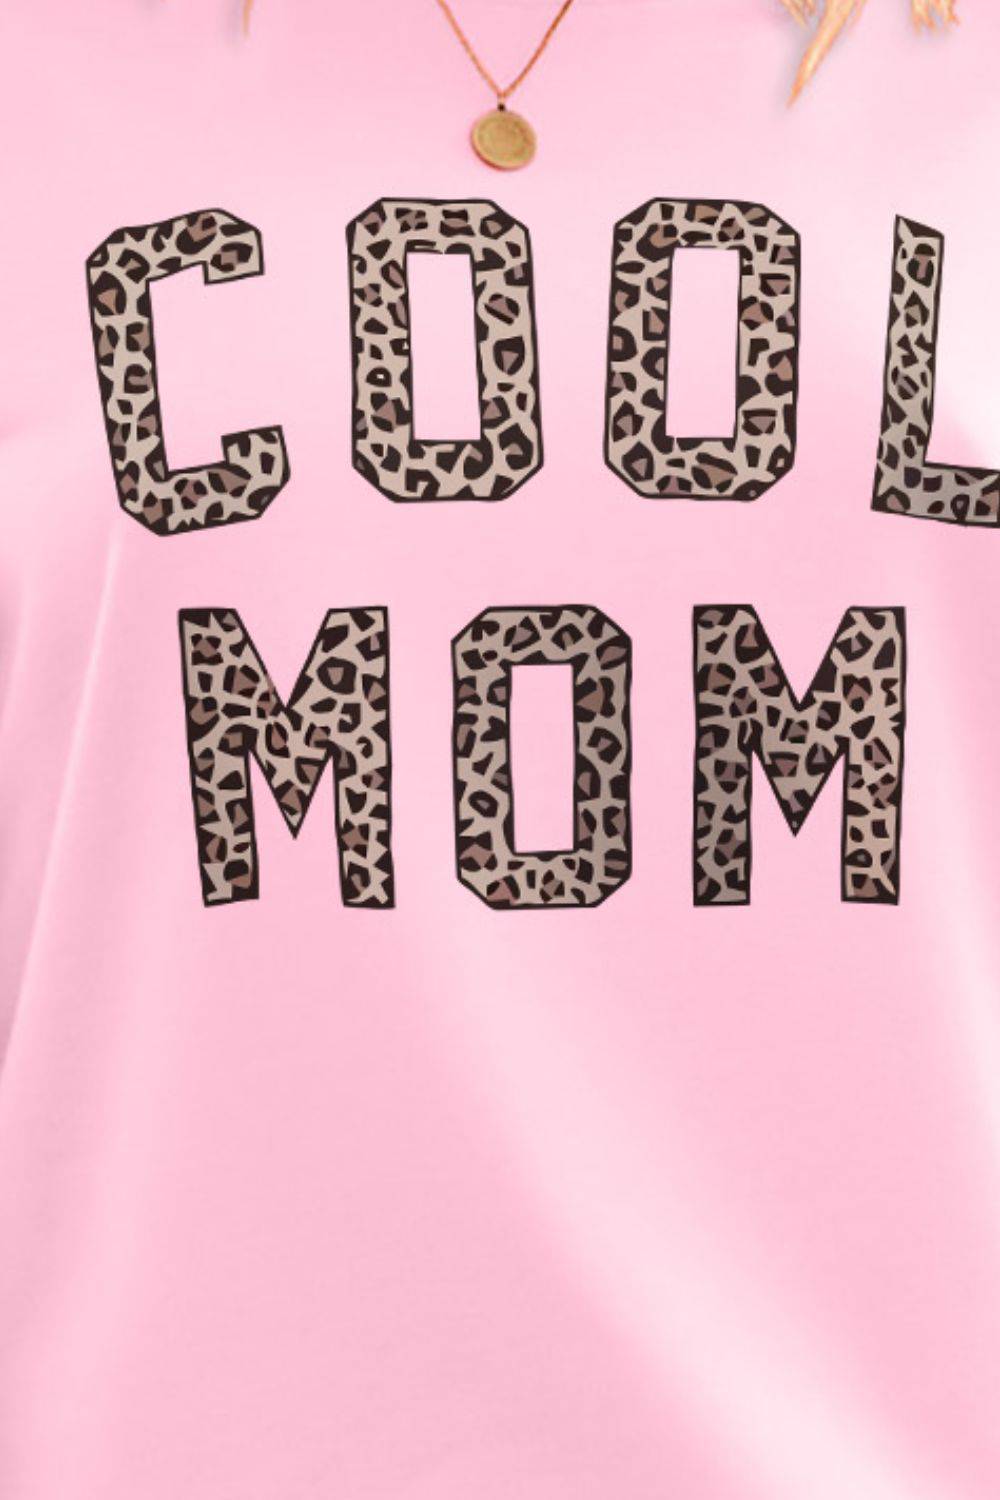 Wrap Yourself in Love with Our COOL MOM Graphic Drop Shoulder Sweatshirt - Feel Confident, Feminine, and Comfortable on Any Occasion. - Guy Christopher 